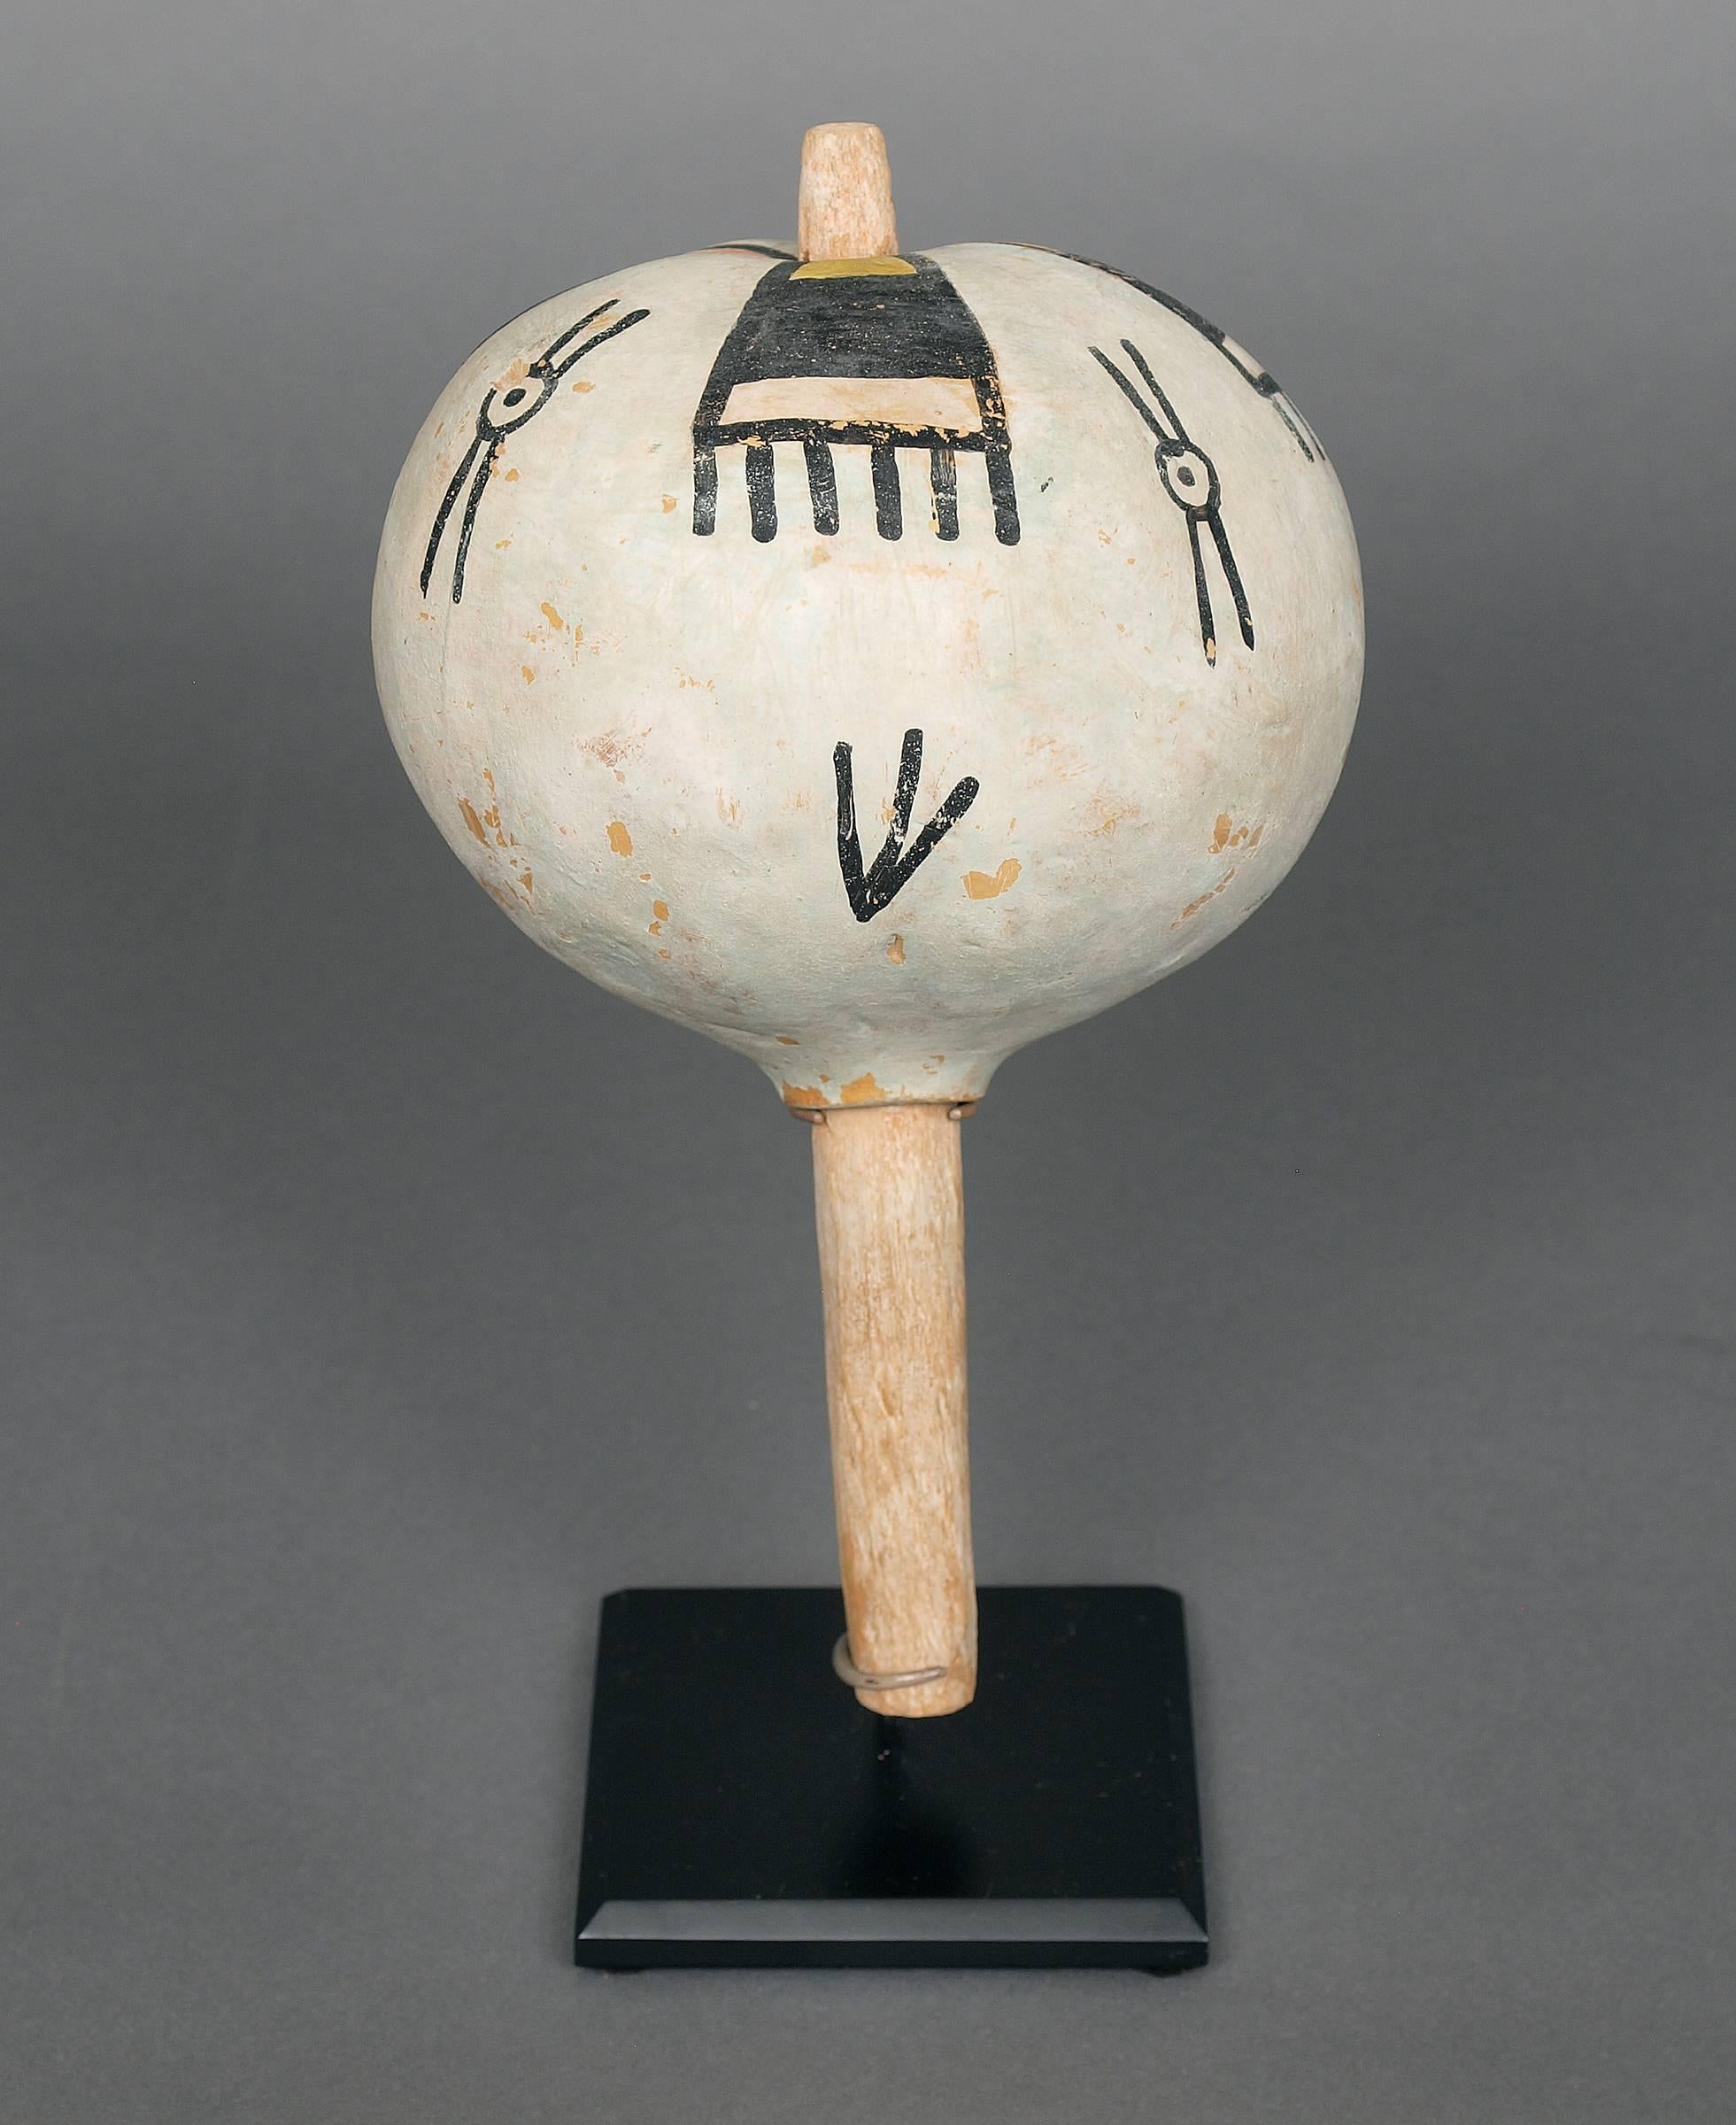 Gourd rattle with black, white, yellow ochre paint and a wooden handle. Created by a Hopi Artist around 1900.

Custom display stand is included.

Expedited and International Shipping is available, please contact us for an estimate.